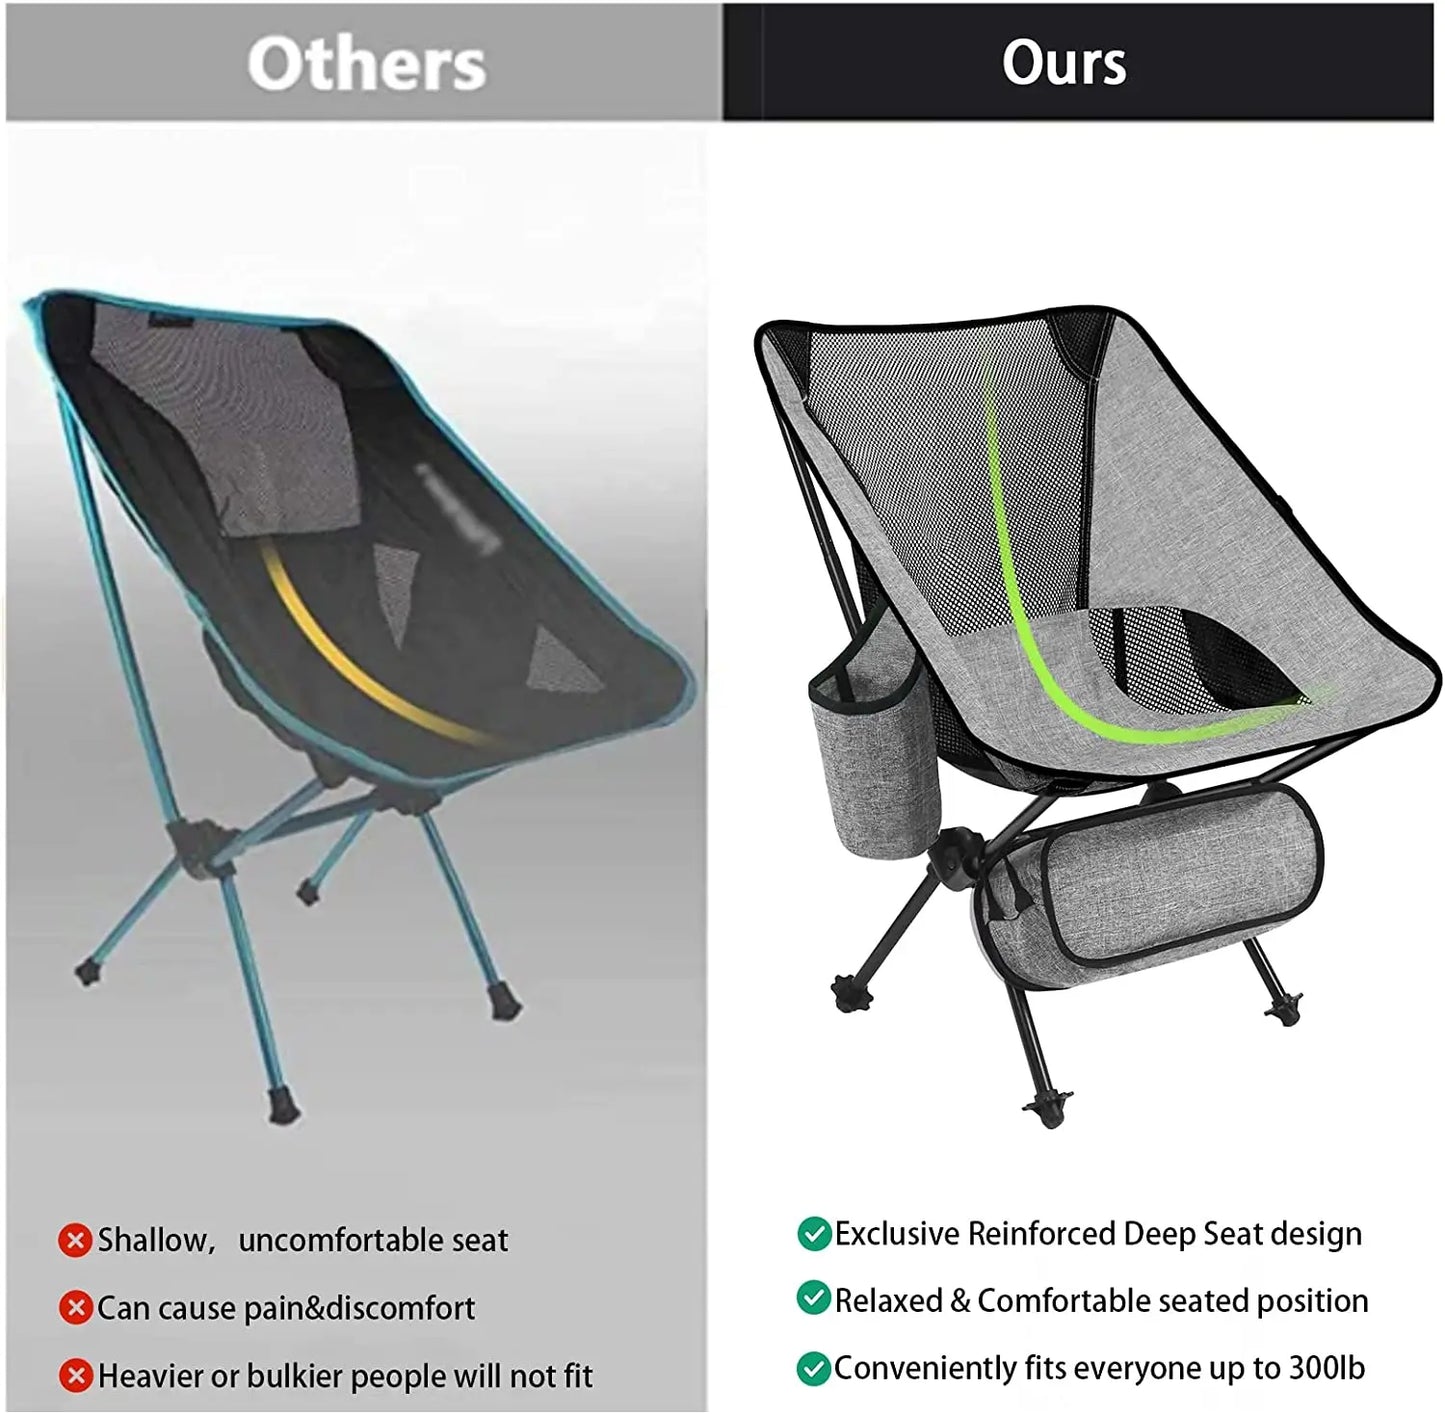 Woqi Camping Chairs Outdoor Ultralight Compact Portable Folding Backpacking Fabric for Beach Outdoor Picnic Travel Fish - Tatooine Nomad